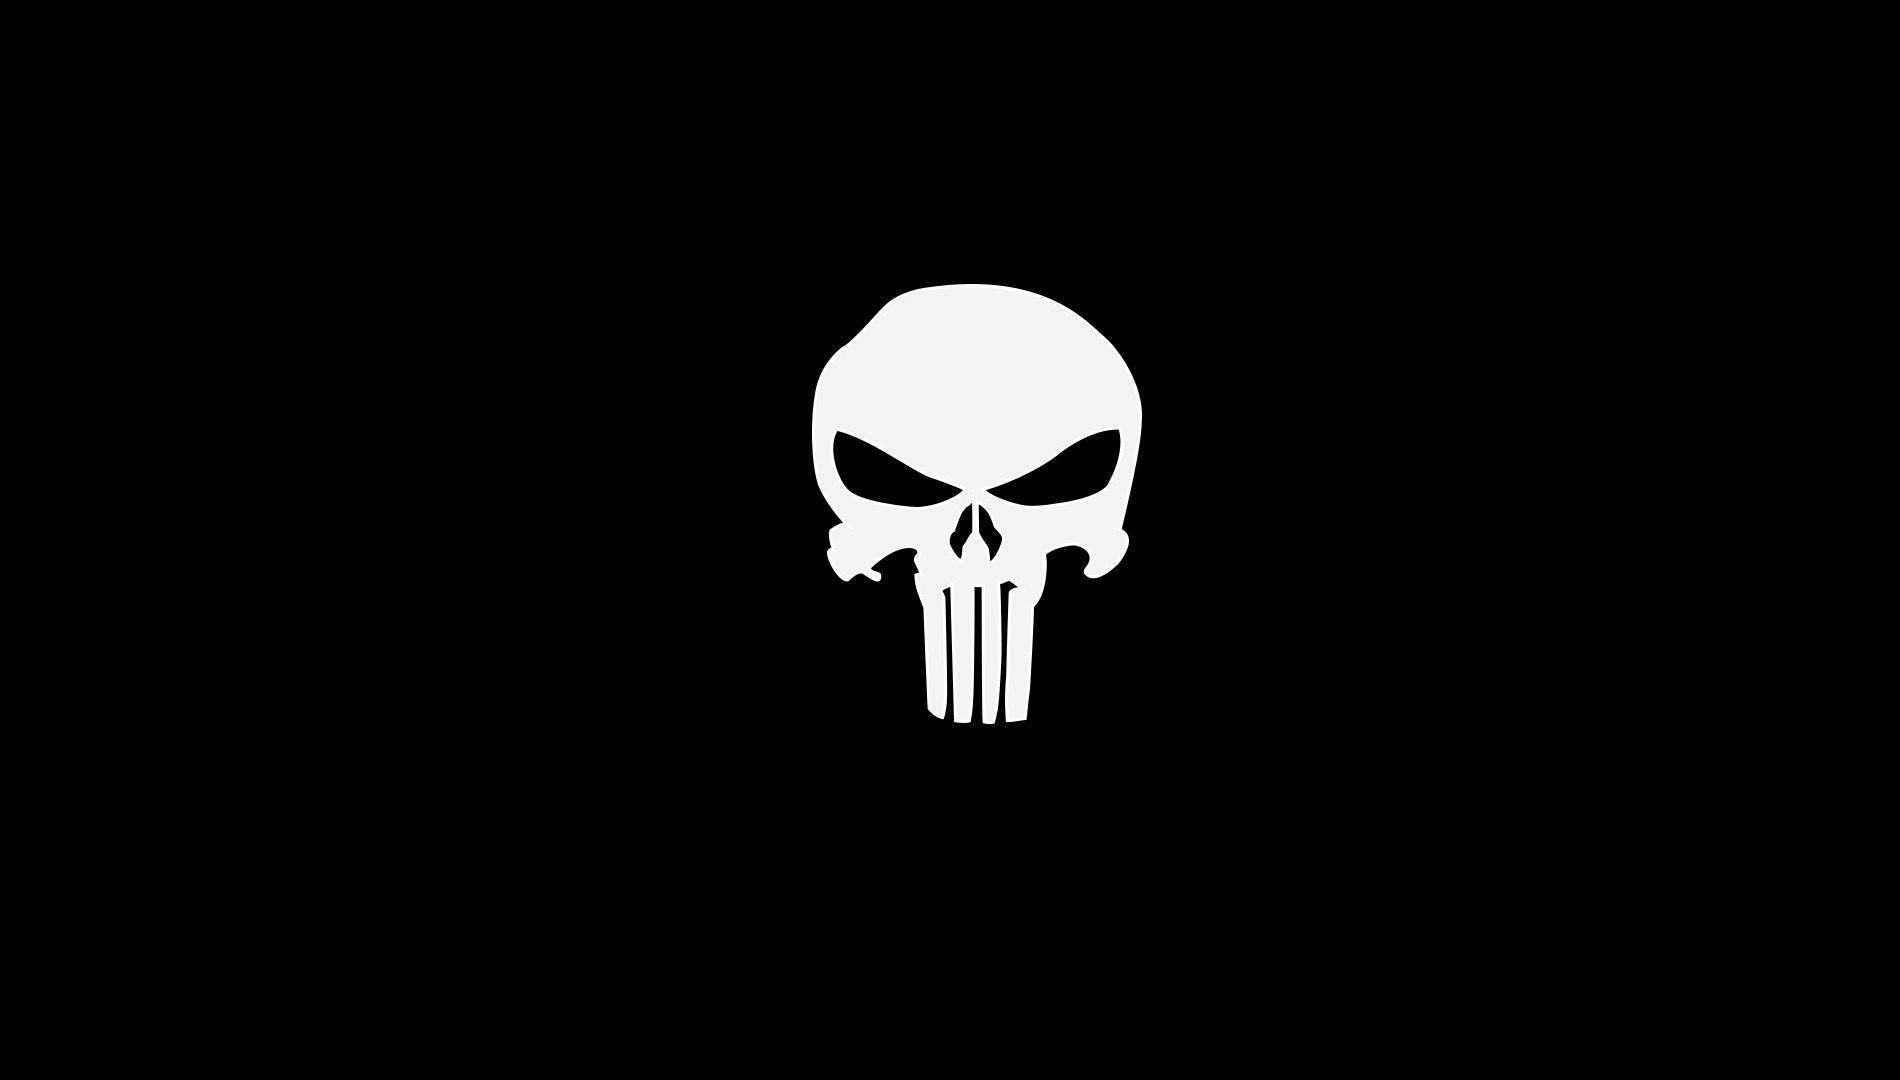 Punisher Symbol : Is The Punisher One Of The Most Epic Comic Book ...